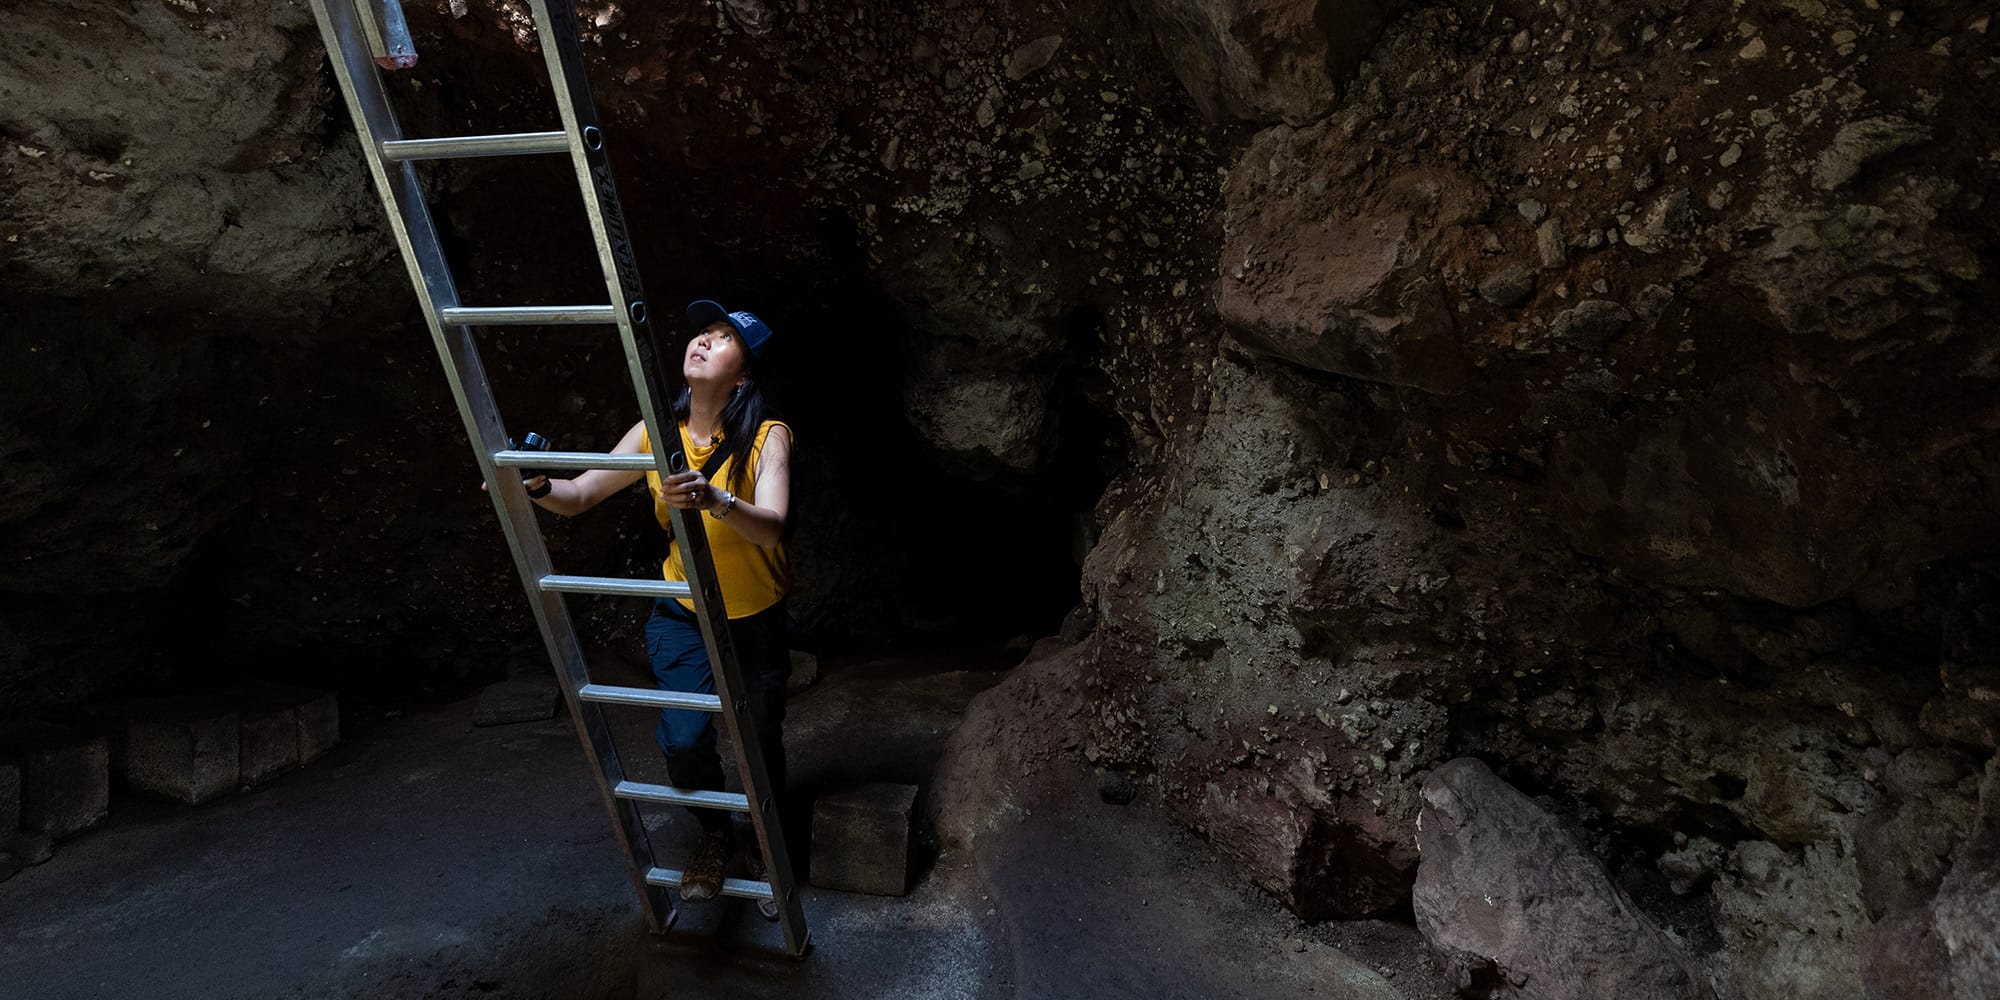 Sugiyama climbs up from an ancient  observatory inside a cave in Teotihuacan.